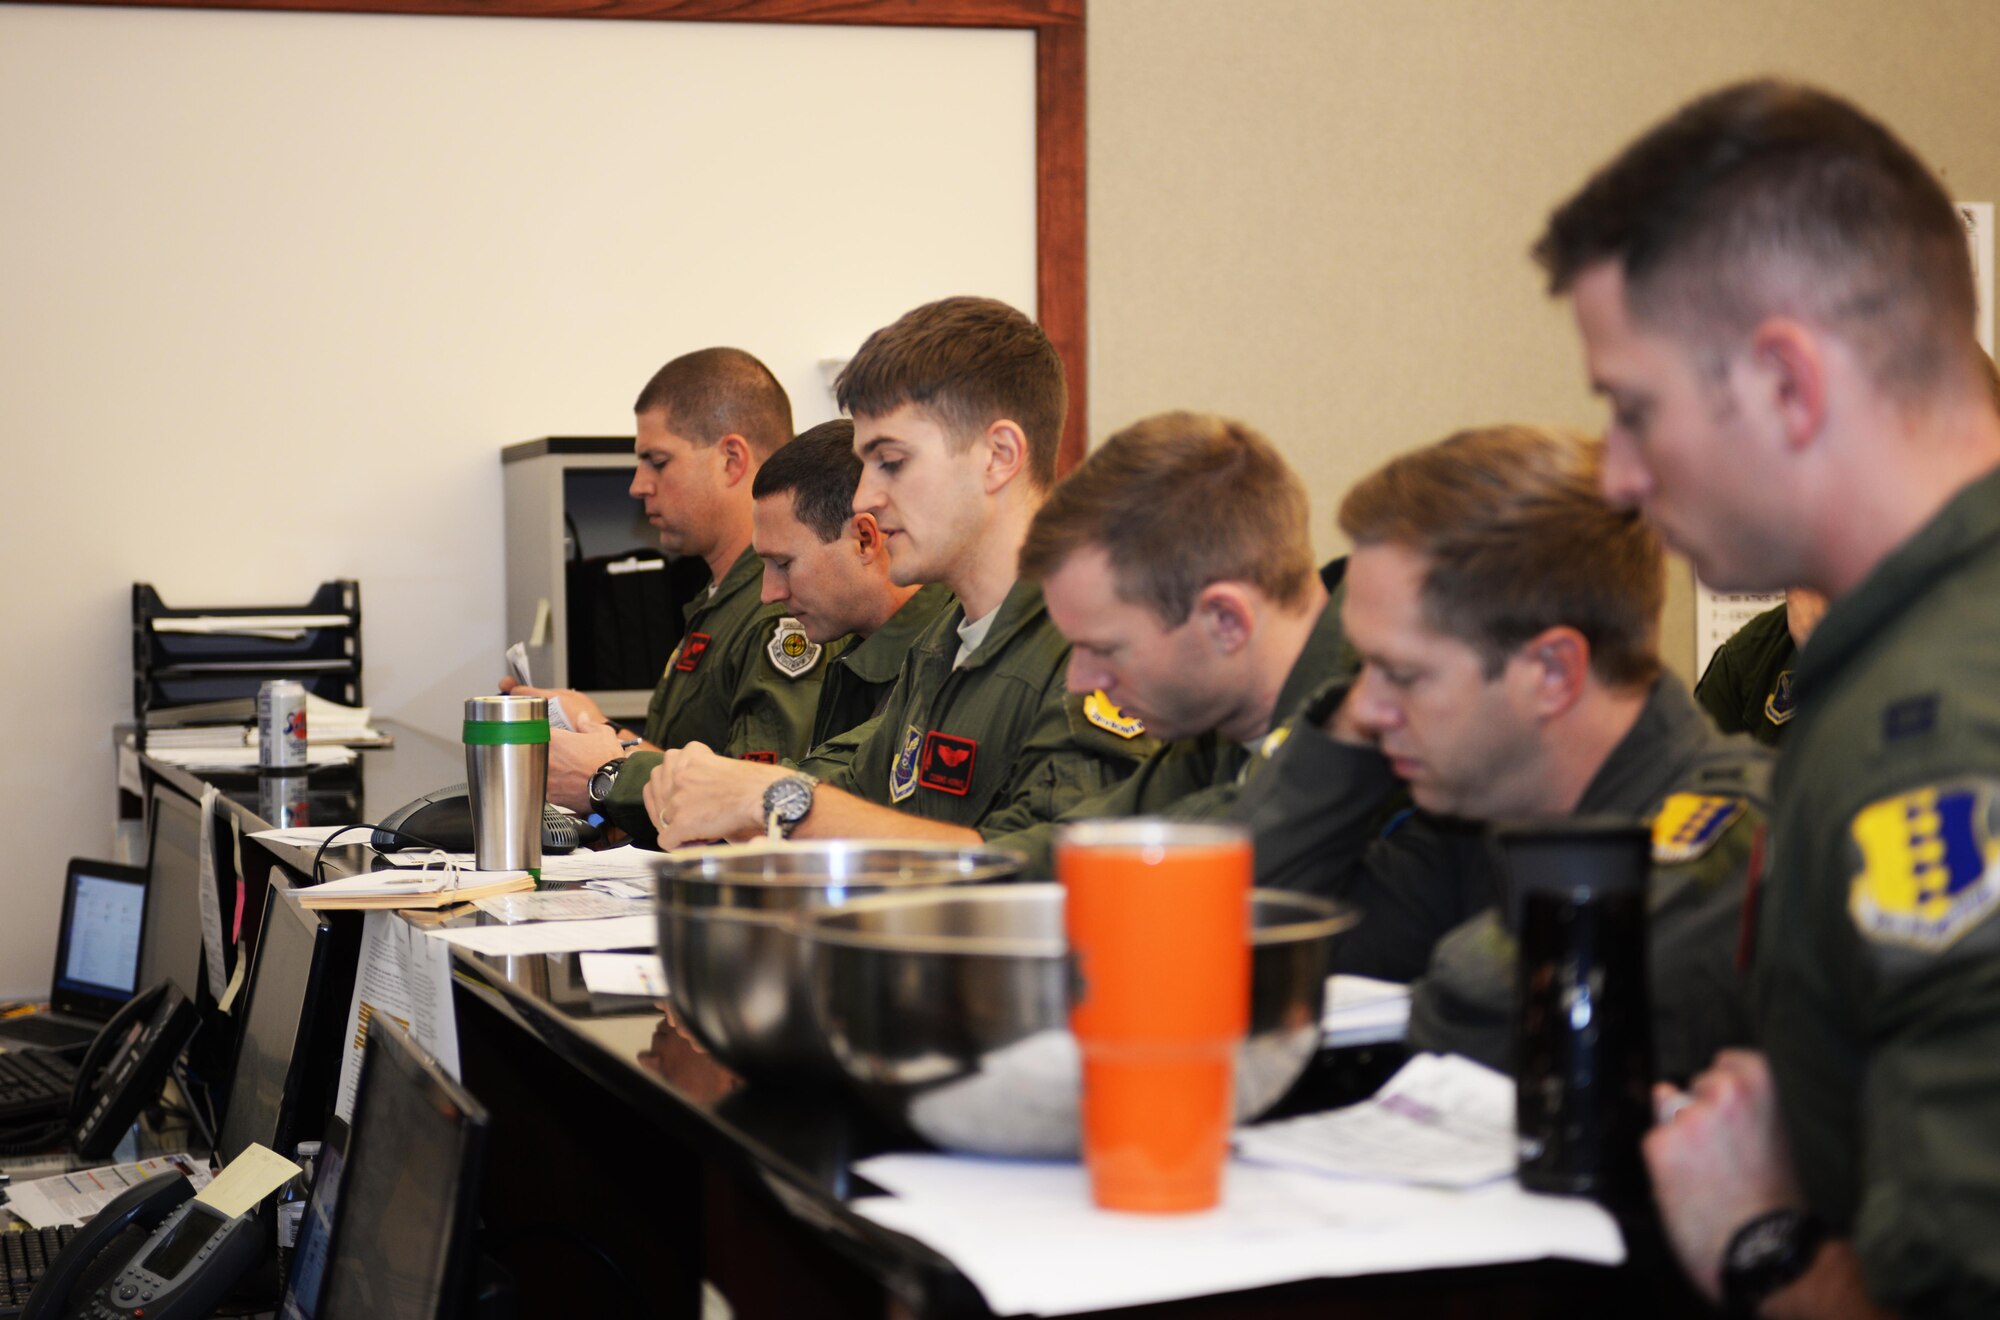 Capt. Ryan Kerns, an instructor pilot assigned to the 34th Bomb Squadron, gives a mission brief before aircrew members depart from Ellsworth Air Force Base, S.D., for the Green Flag exercise 18-1 on Oct. 18, 2017. Aircrew members will be flying in air-to-ground missions for U.S. Army units on the ground. Green Flag exercises focuses on close-air support training which is different from Red Flag exercises which focus on air-to-air combat missions. (U.S. Air Force photo by Airman 1st Class Thomas Karol)